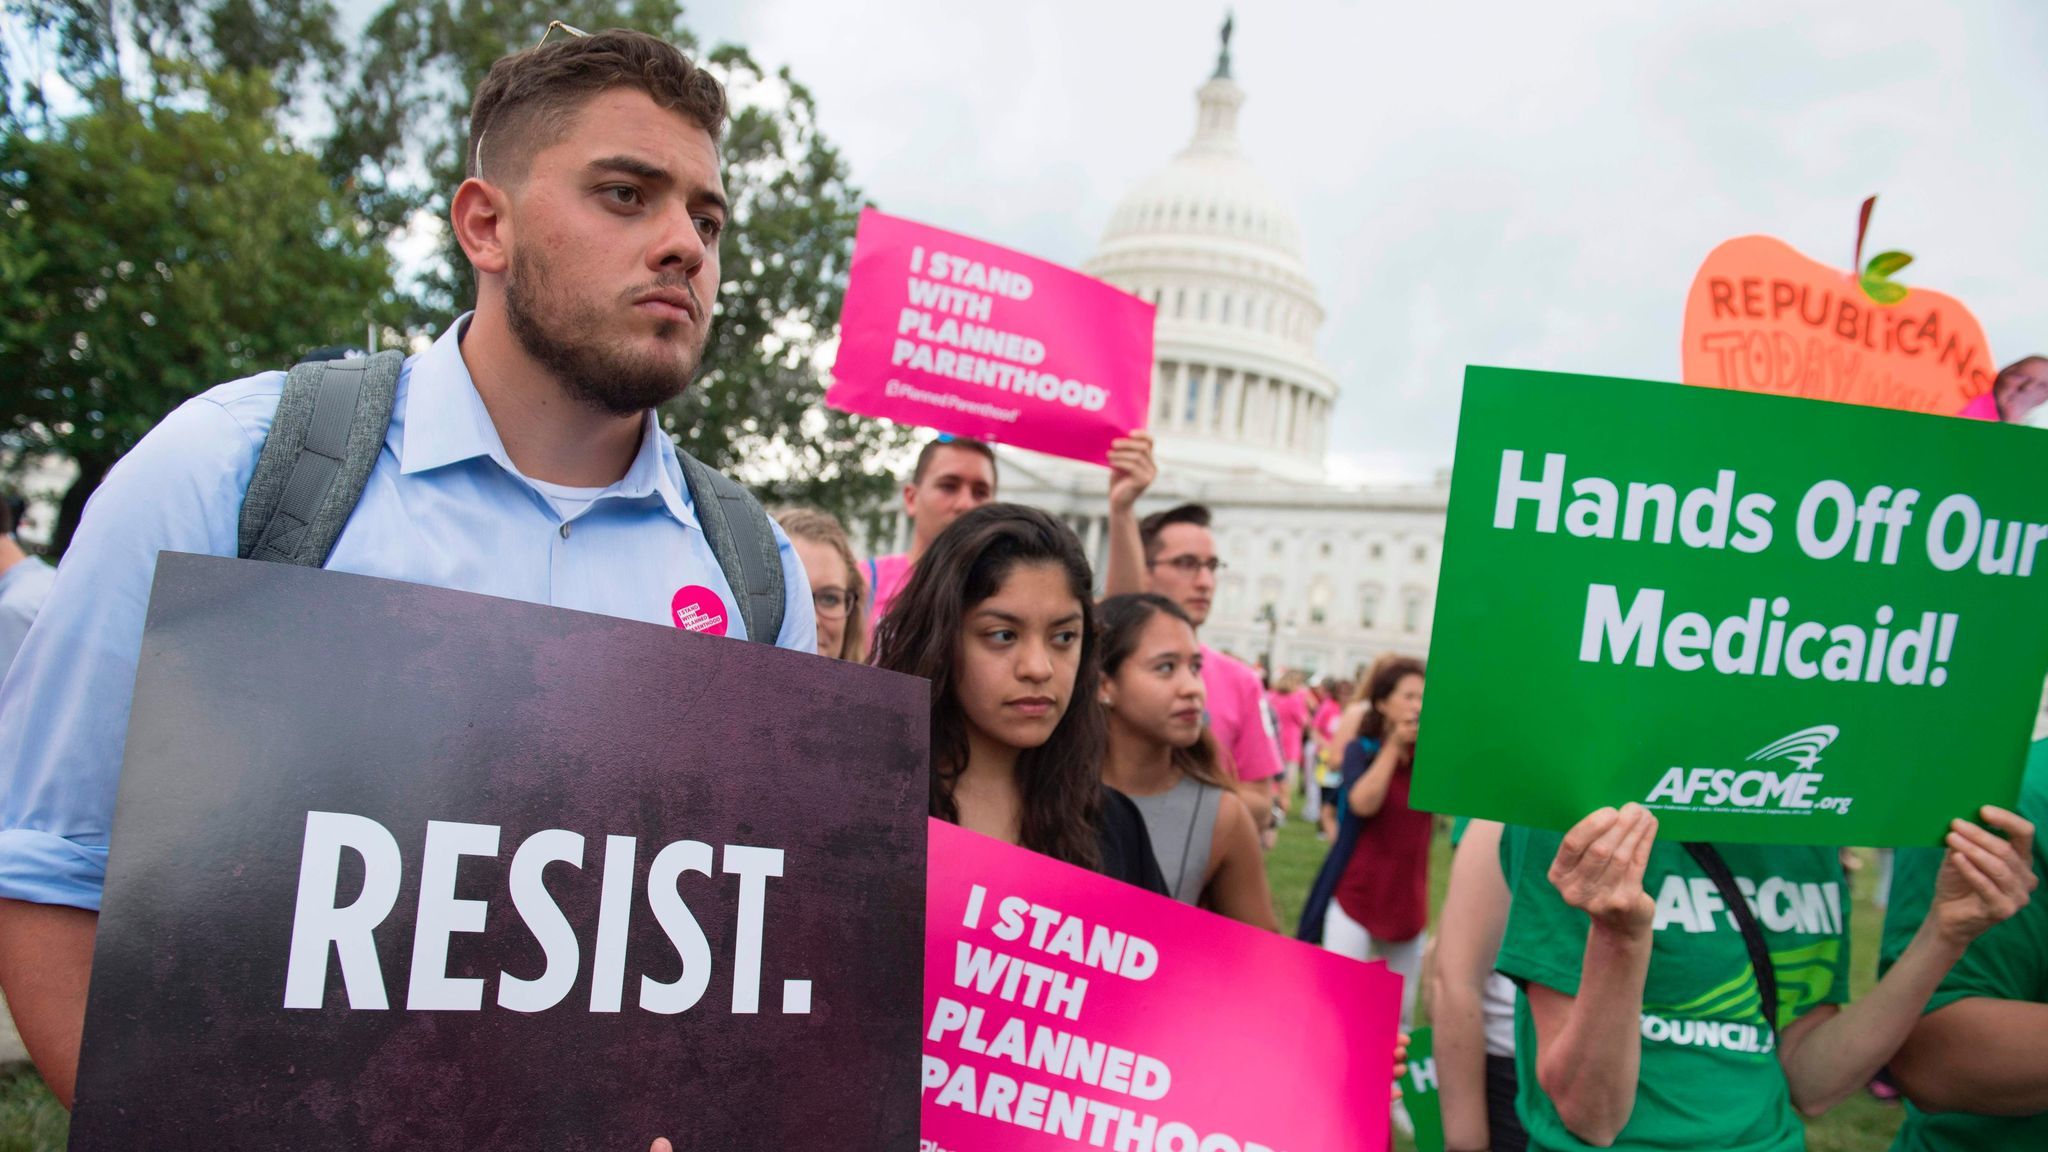 Supporters of Planned Parenthood demonstrate against healthcare legislation proposed by Senate Republicans.